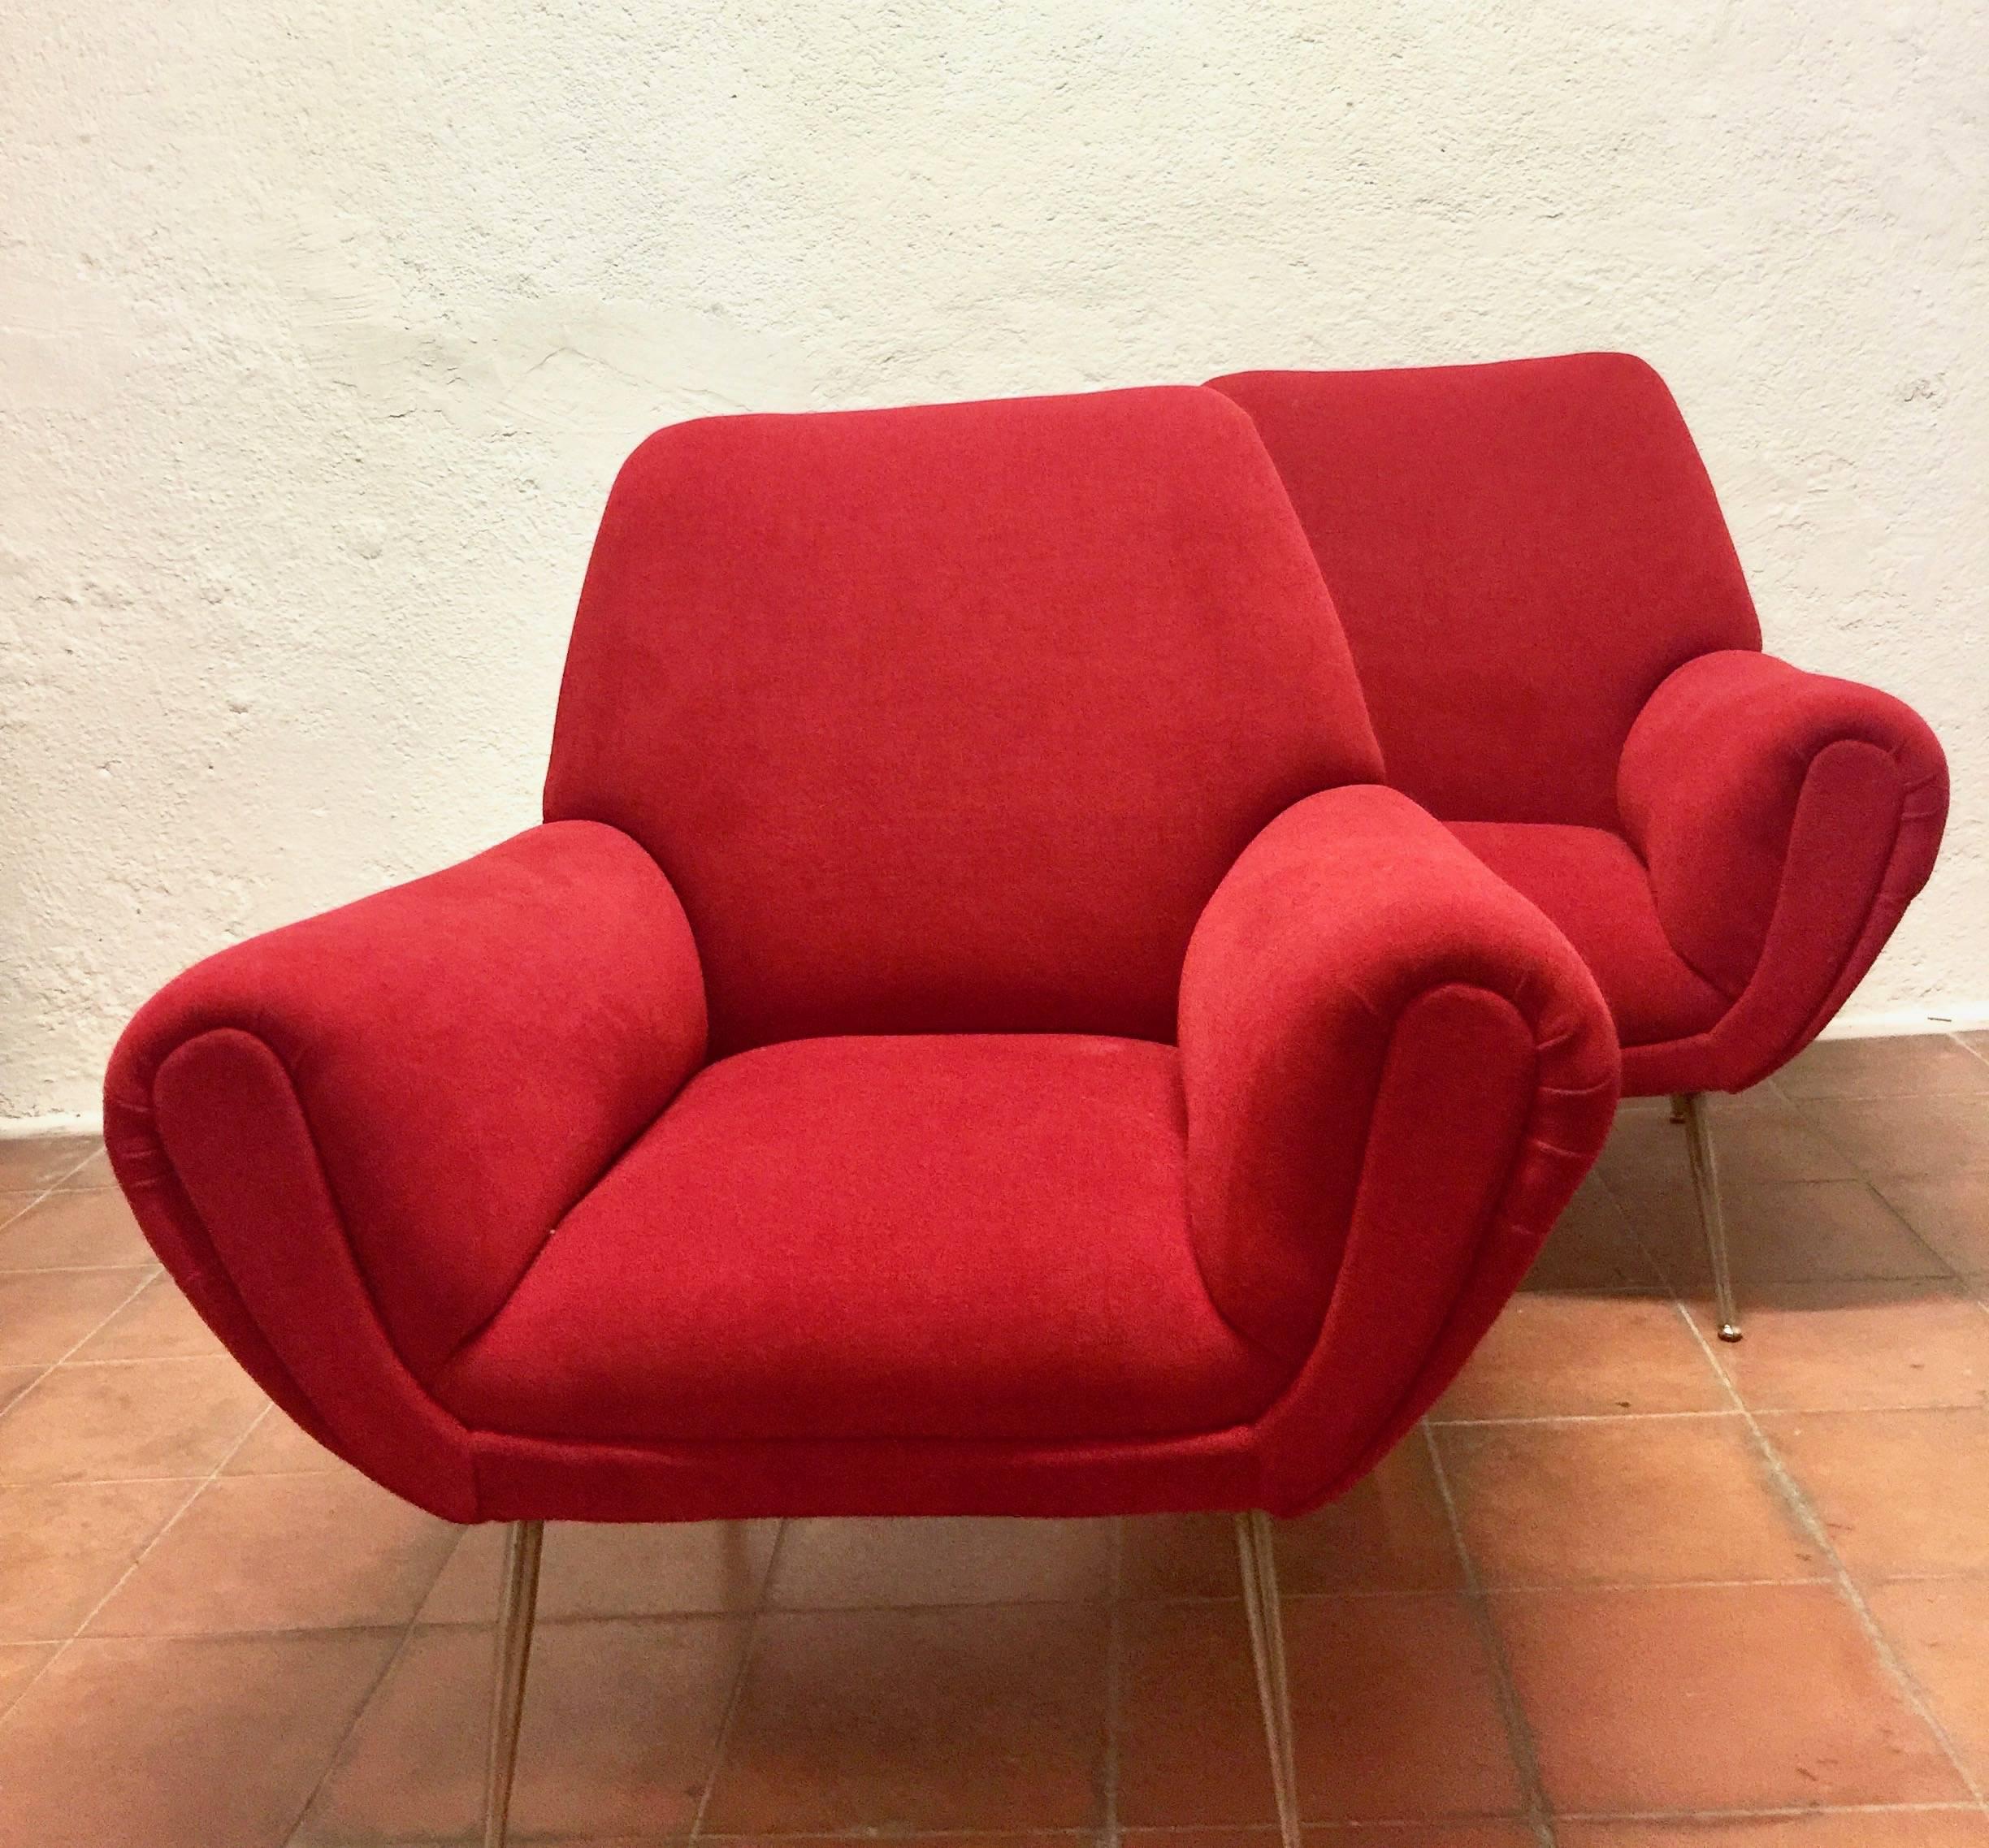 Pair of Italian armchairs. Reupholstered in red. Originally in the same color SM imitation leather.
          